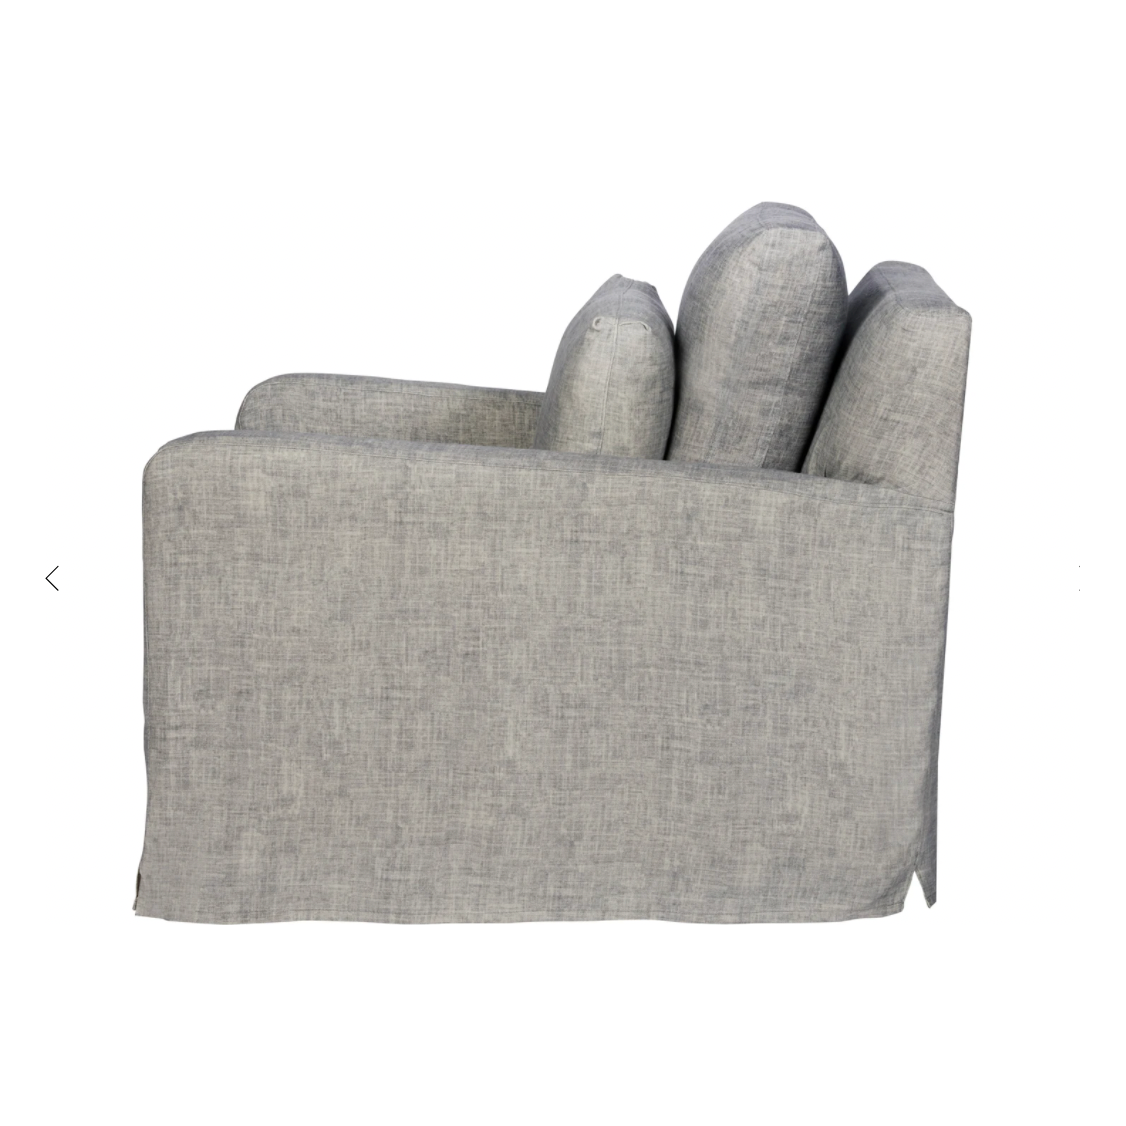 This deep and low resting Malibu Chair is one of our absolute favorites by Cisco Brothers!  As shown slipcovered Nolita Denim, a similar fabric to Brevard Rose 100% linen, and Brevard Burlap.   Size: 33"w x 29"h x 39"d